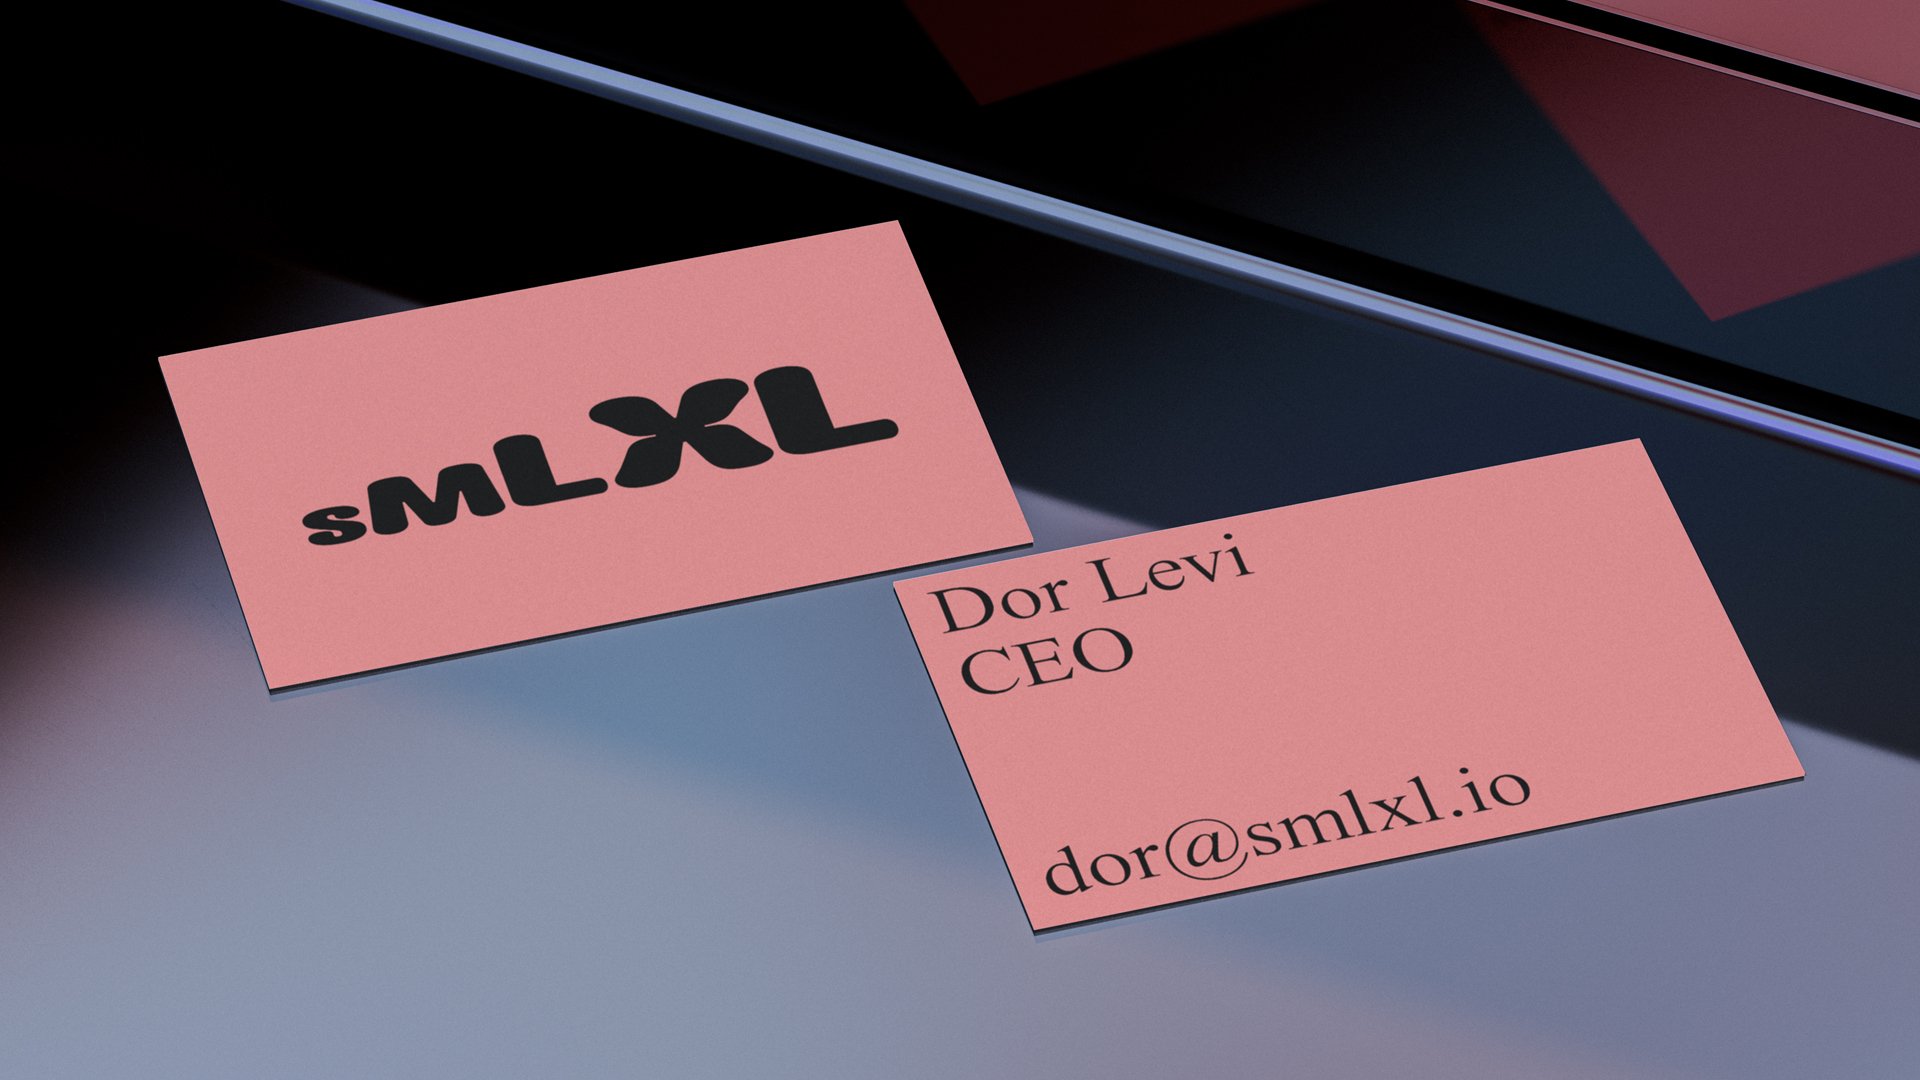  Logotype and generative brand identity for New York based accessibility tech start-up smlXL designed by DIA. Reviewed by Thomas Barnett for BP&O.